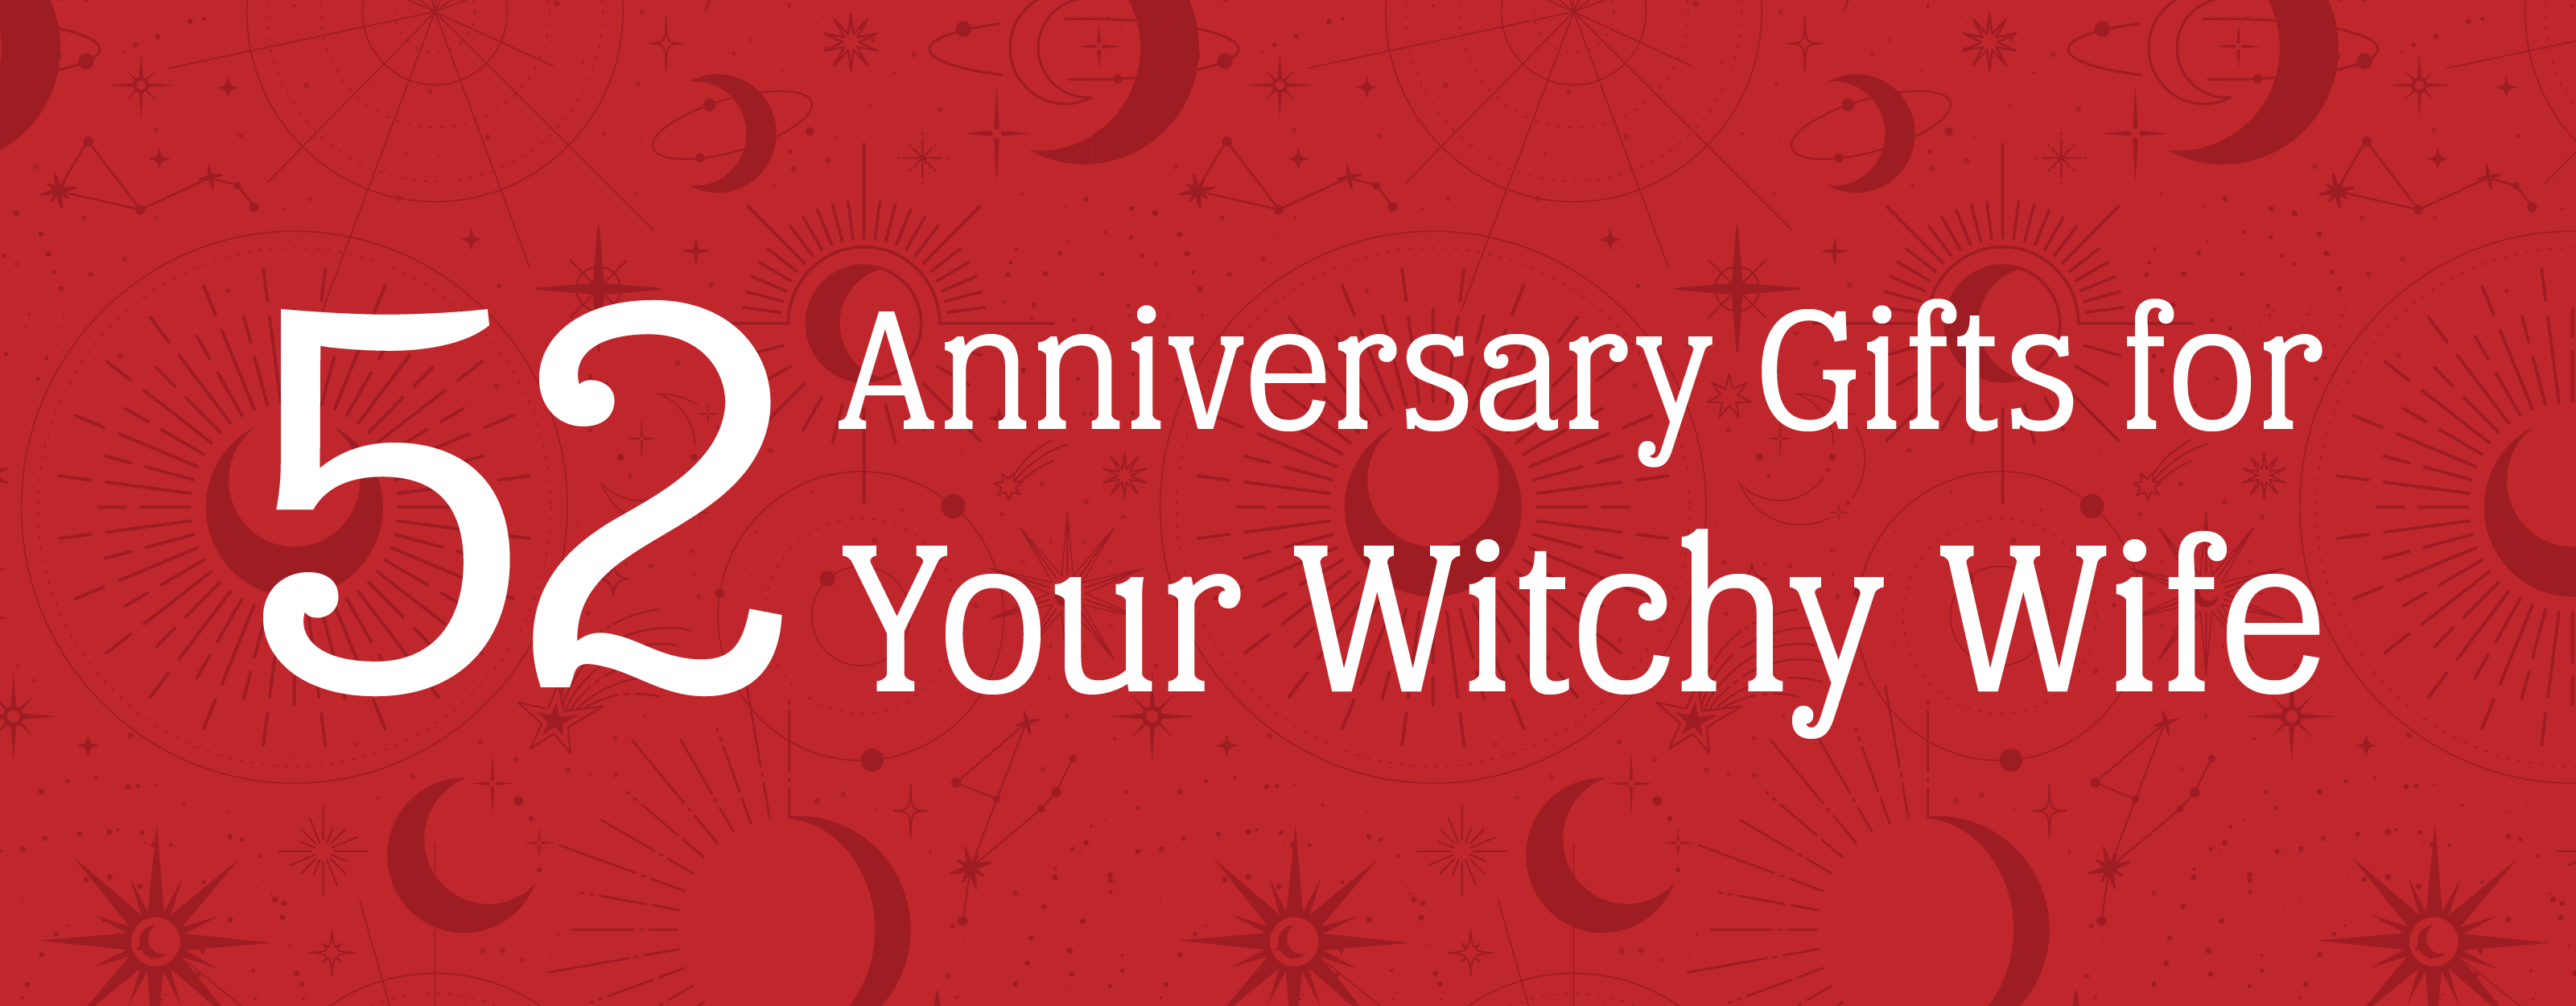 Moon and star pattern on a red background with a white text overlay that reads '52 Anniversary Gifts for Your Witchy Wife"